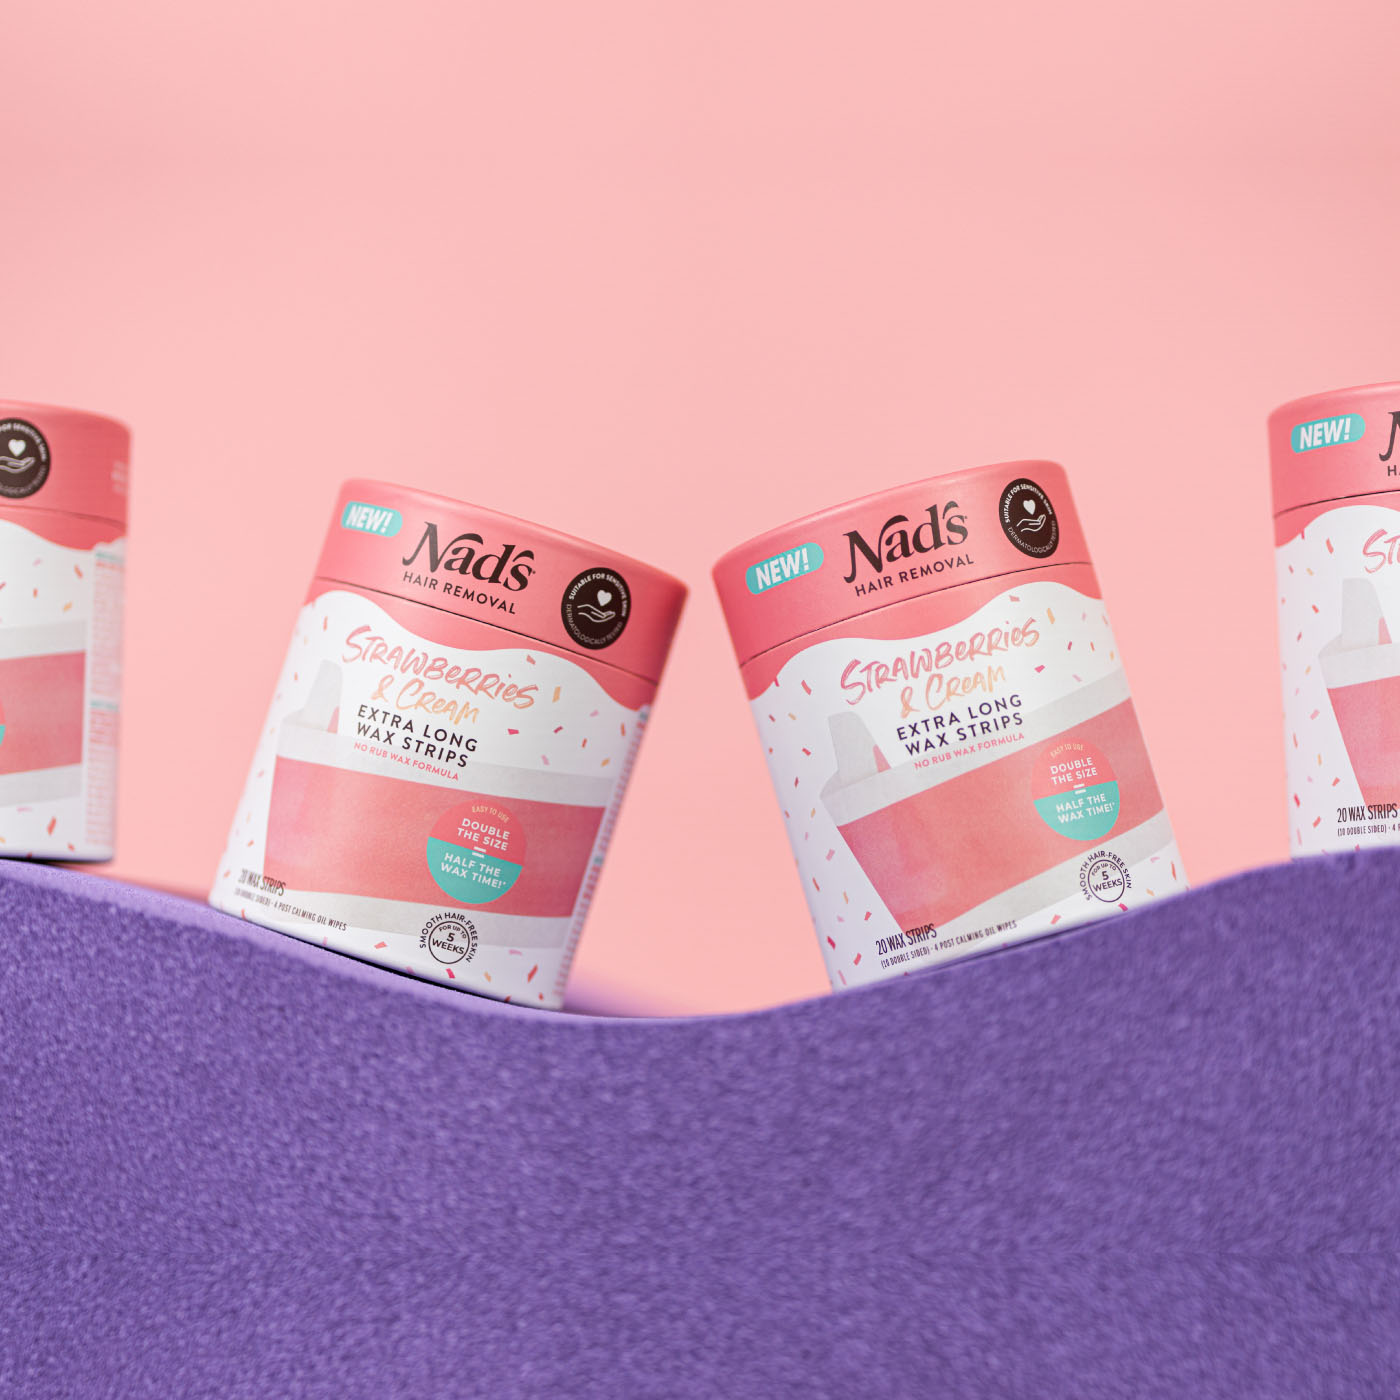 Meet Nad’s New Hair Removal Product for Faster Waxing! | Nad's Hair Removal Blog